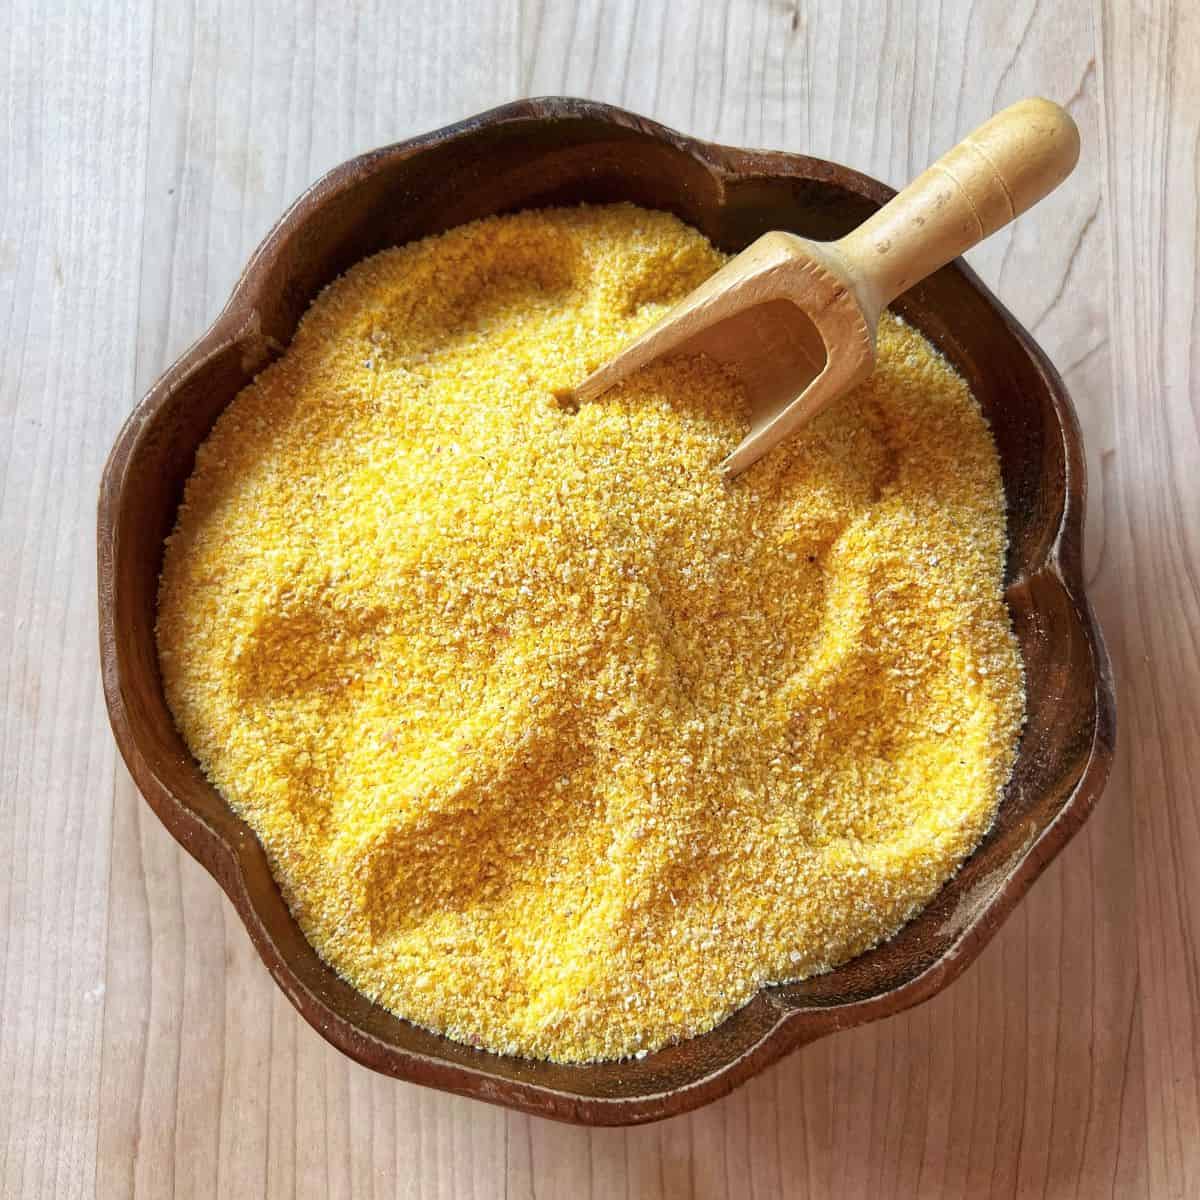 An overhead shot of the the coarse and fine texture of cornmeal used to make this recipe for homemade polenta.